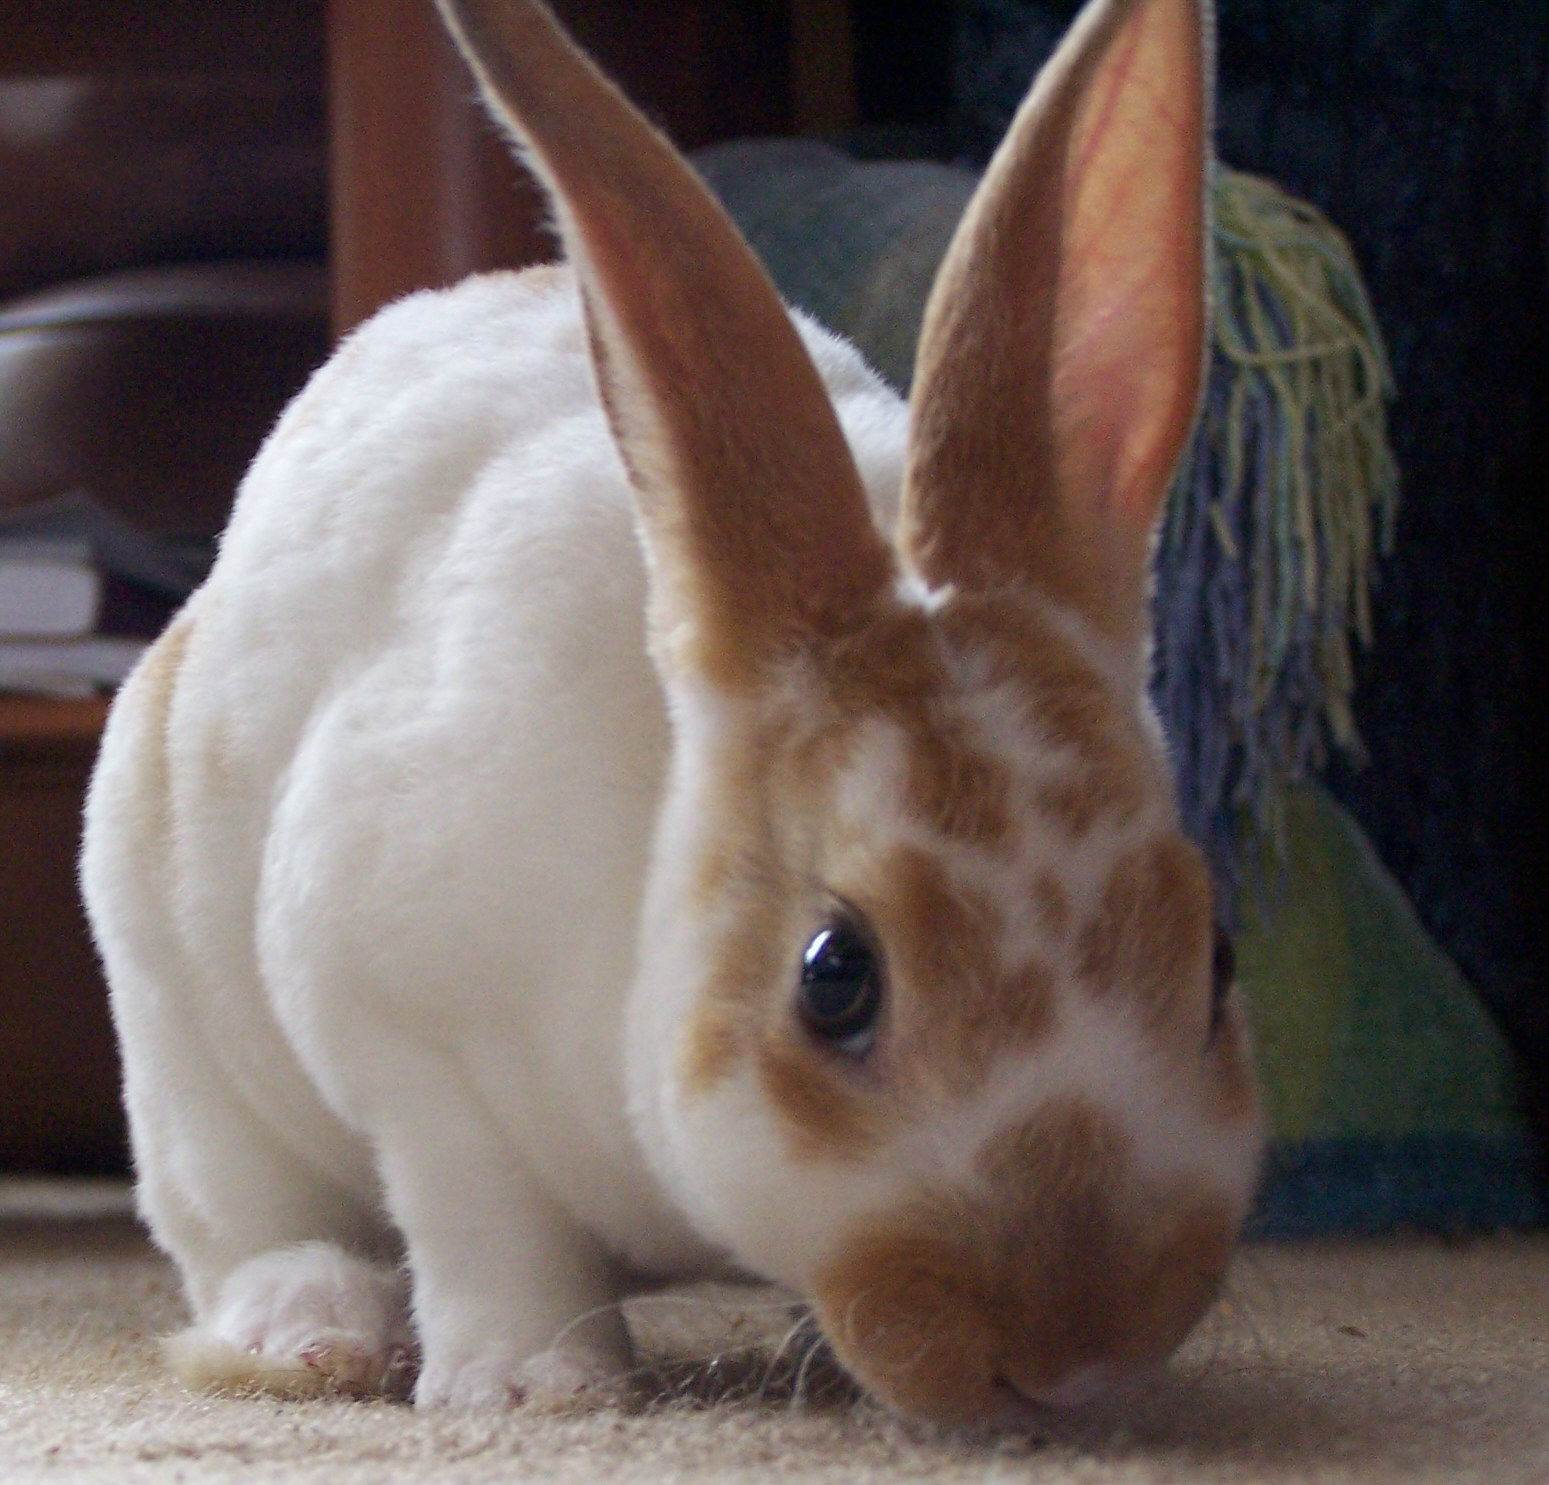 a bunny with some long ears stands on the floor